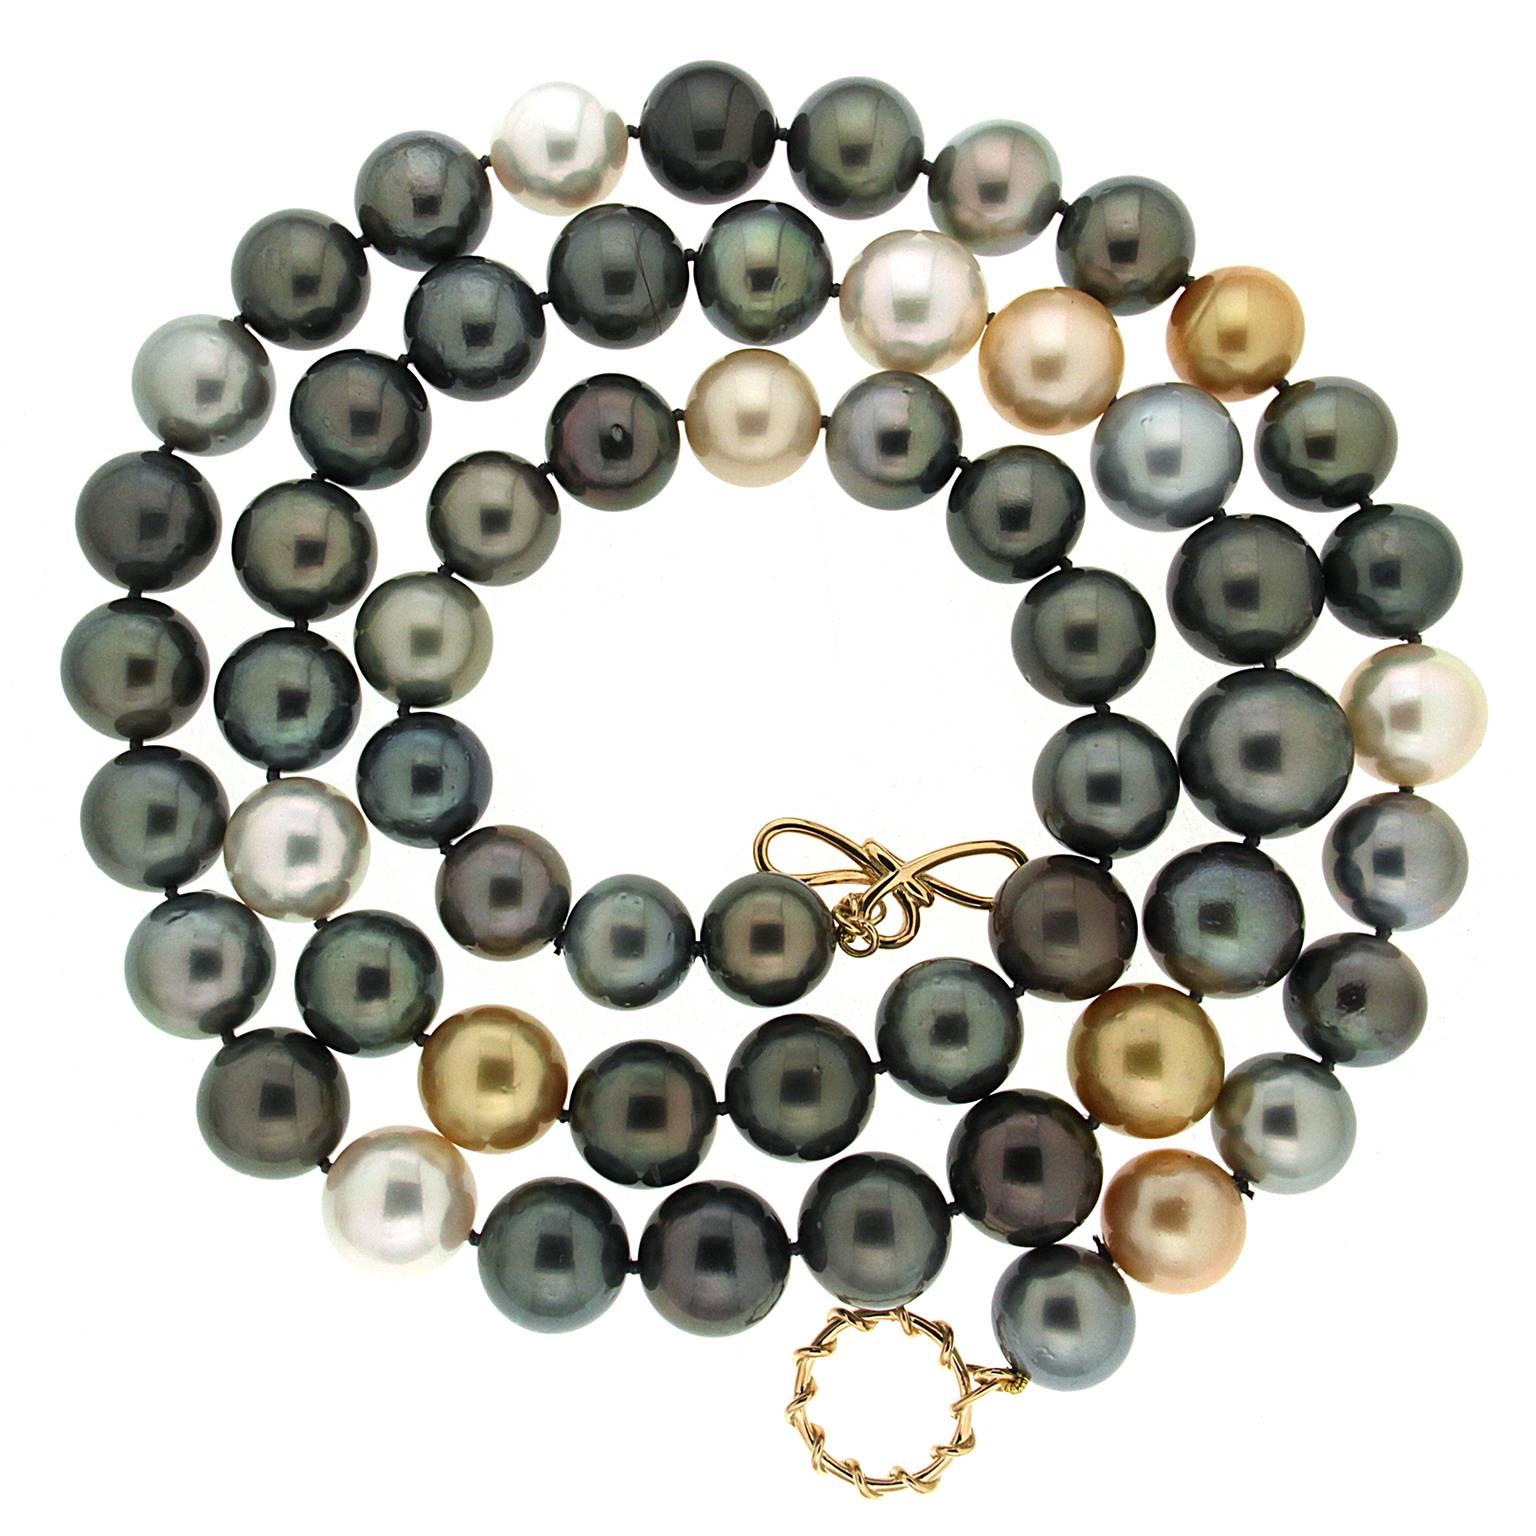 Multi-Color South Sea, Golden and Tahitian Pearls Necklace